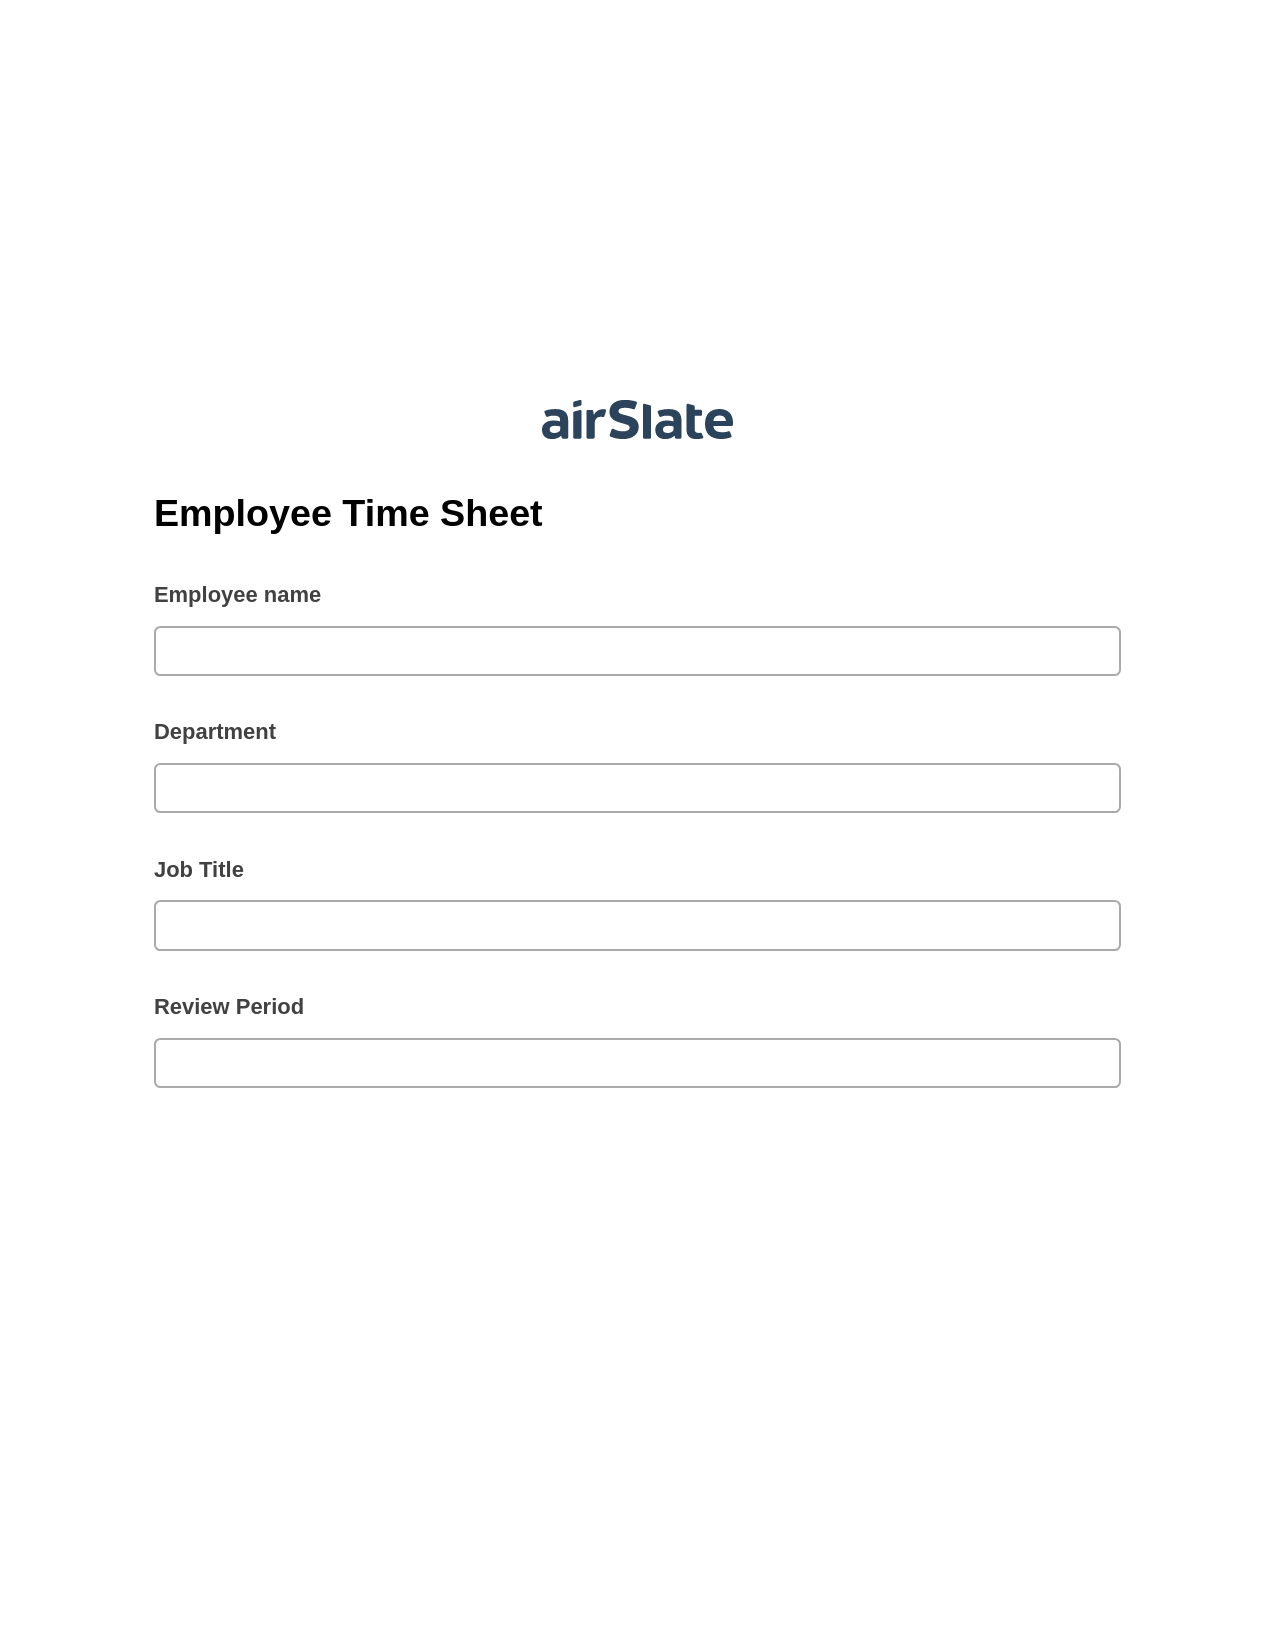 Employee Time Sheet Pre-fill from Google Sheets Bot, Create slate addon, Archive to OneDrive Bot